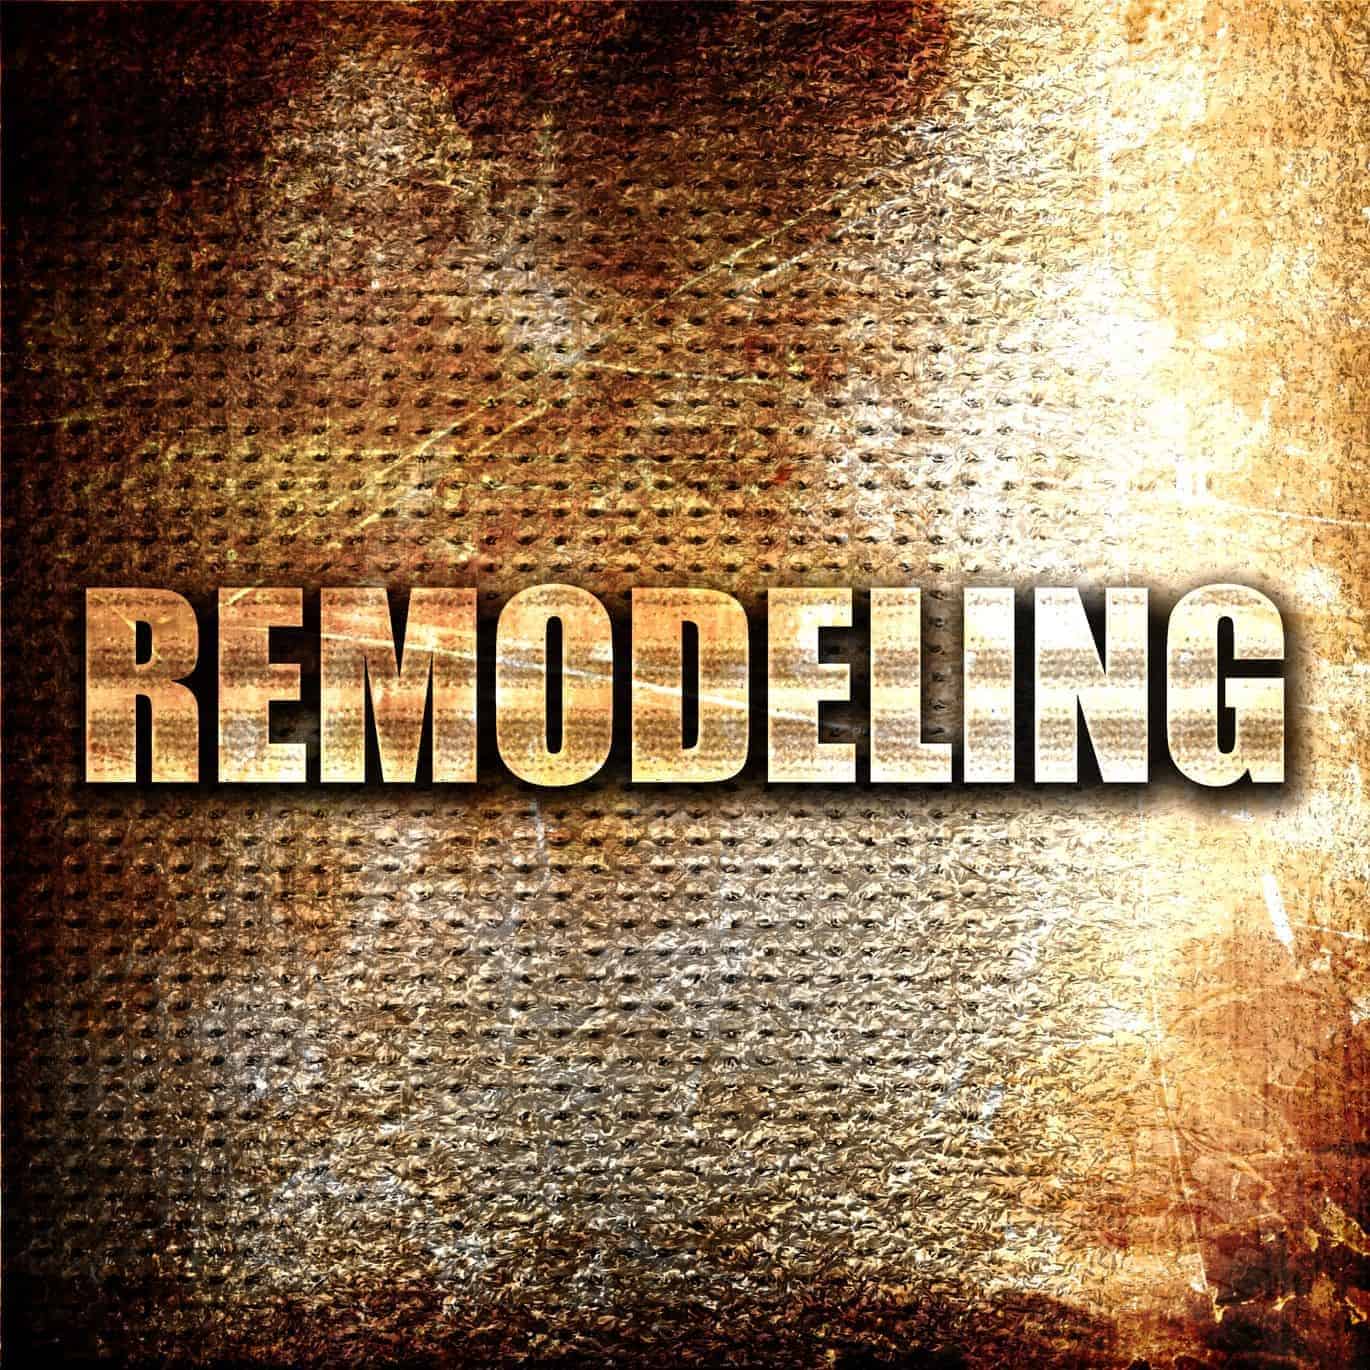 Remodeling-Contractors-Near-Me